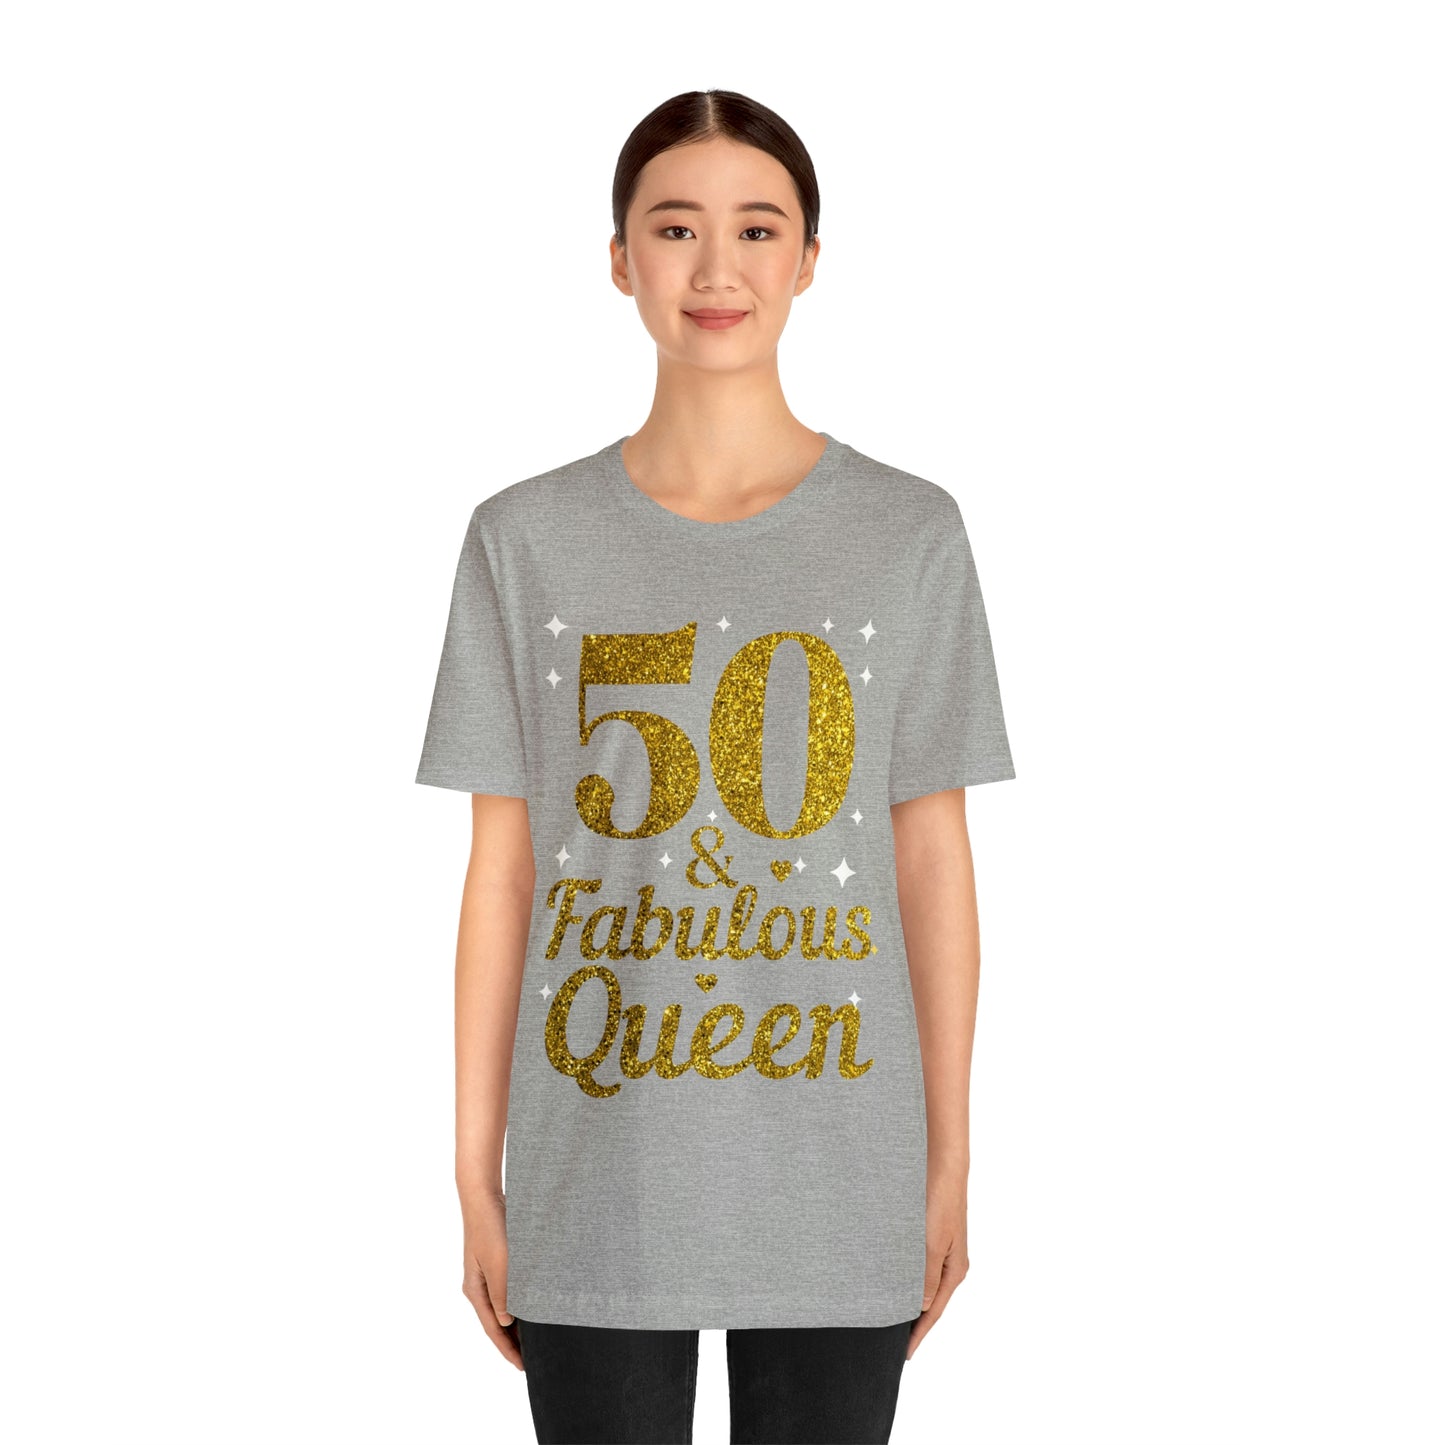 Funny 50th birthday shirt, 50th birthday Tshirt, 50 and fabulous Queen, birthday queen shirt, Gift for 50th birthday, Vintage shirt, birthday gift, birthday girl shirt, mom’s birthday gift, mom gift, wife gift,